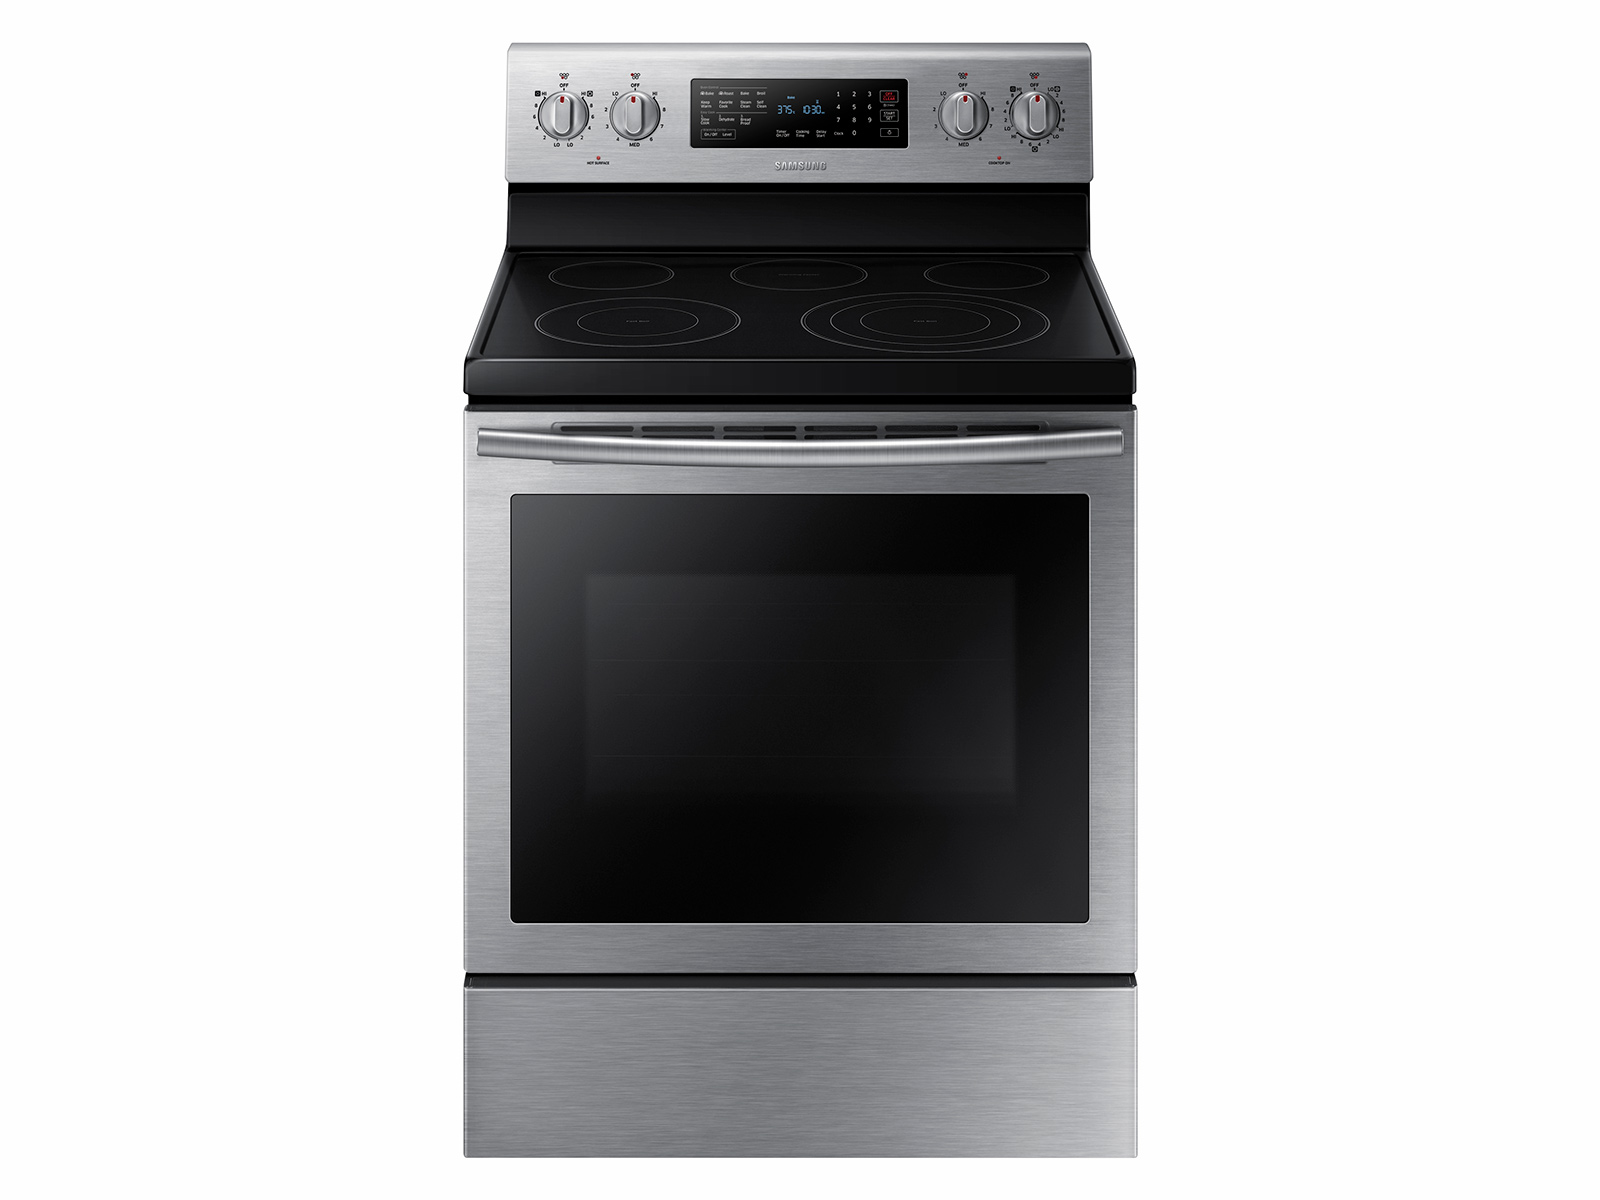 Convection Ovens in Ranges, Ovens and Cooktops 